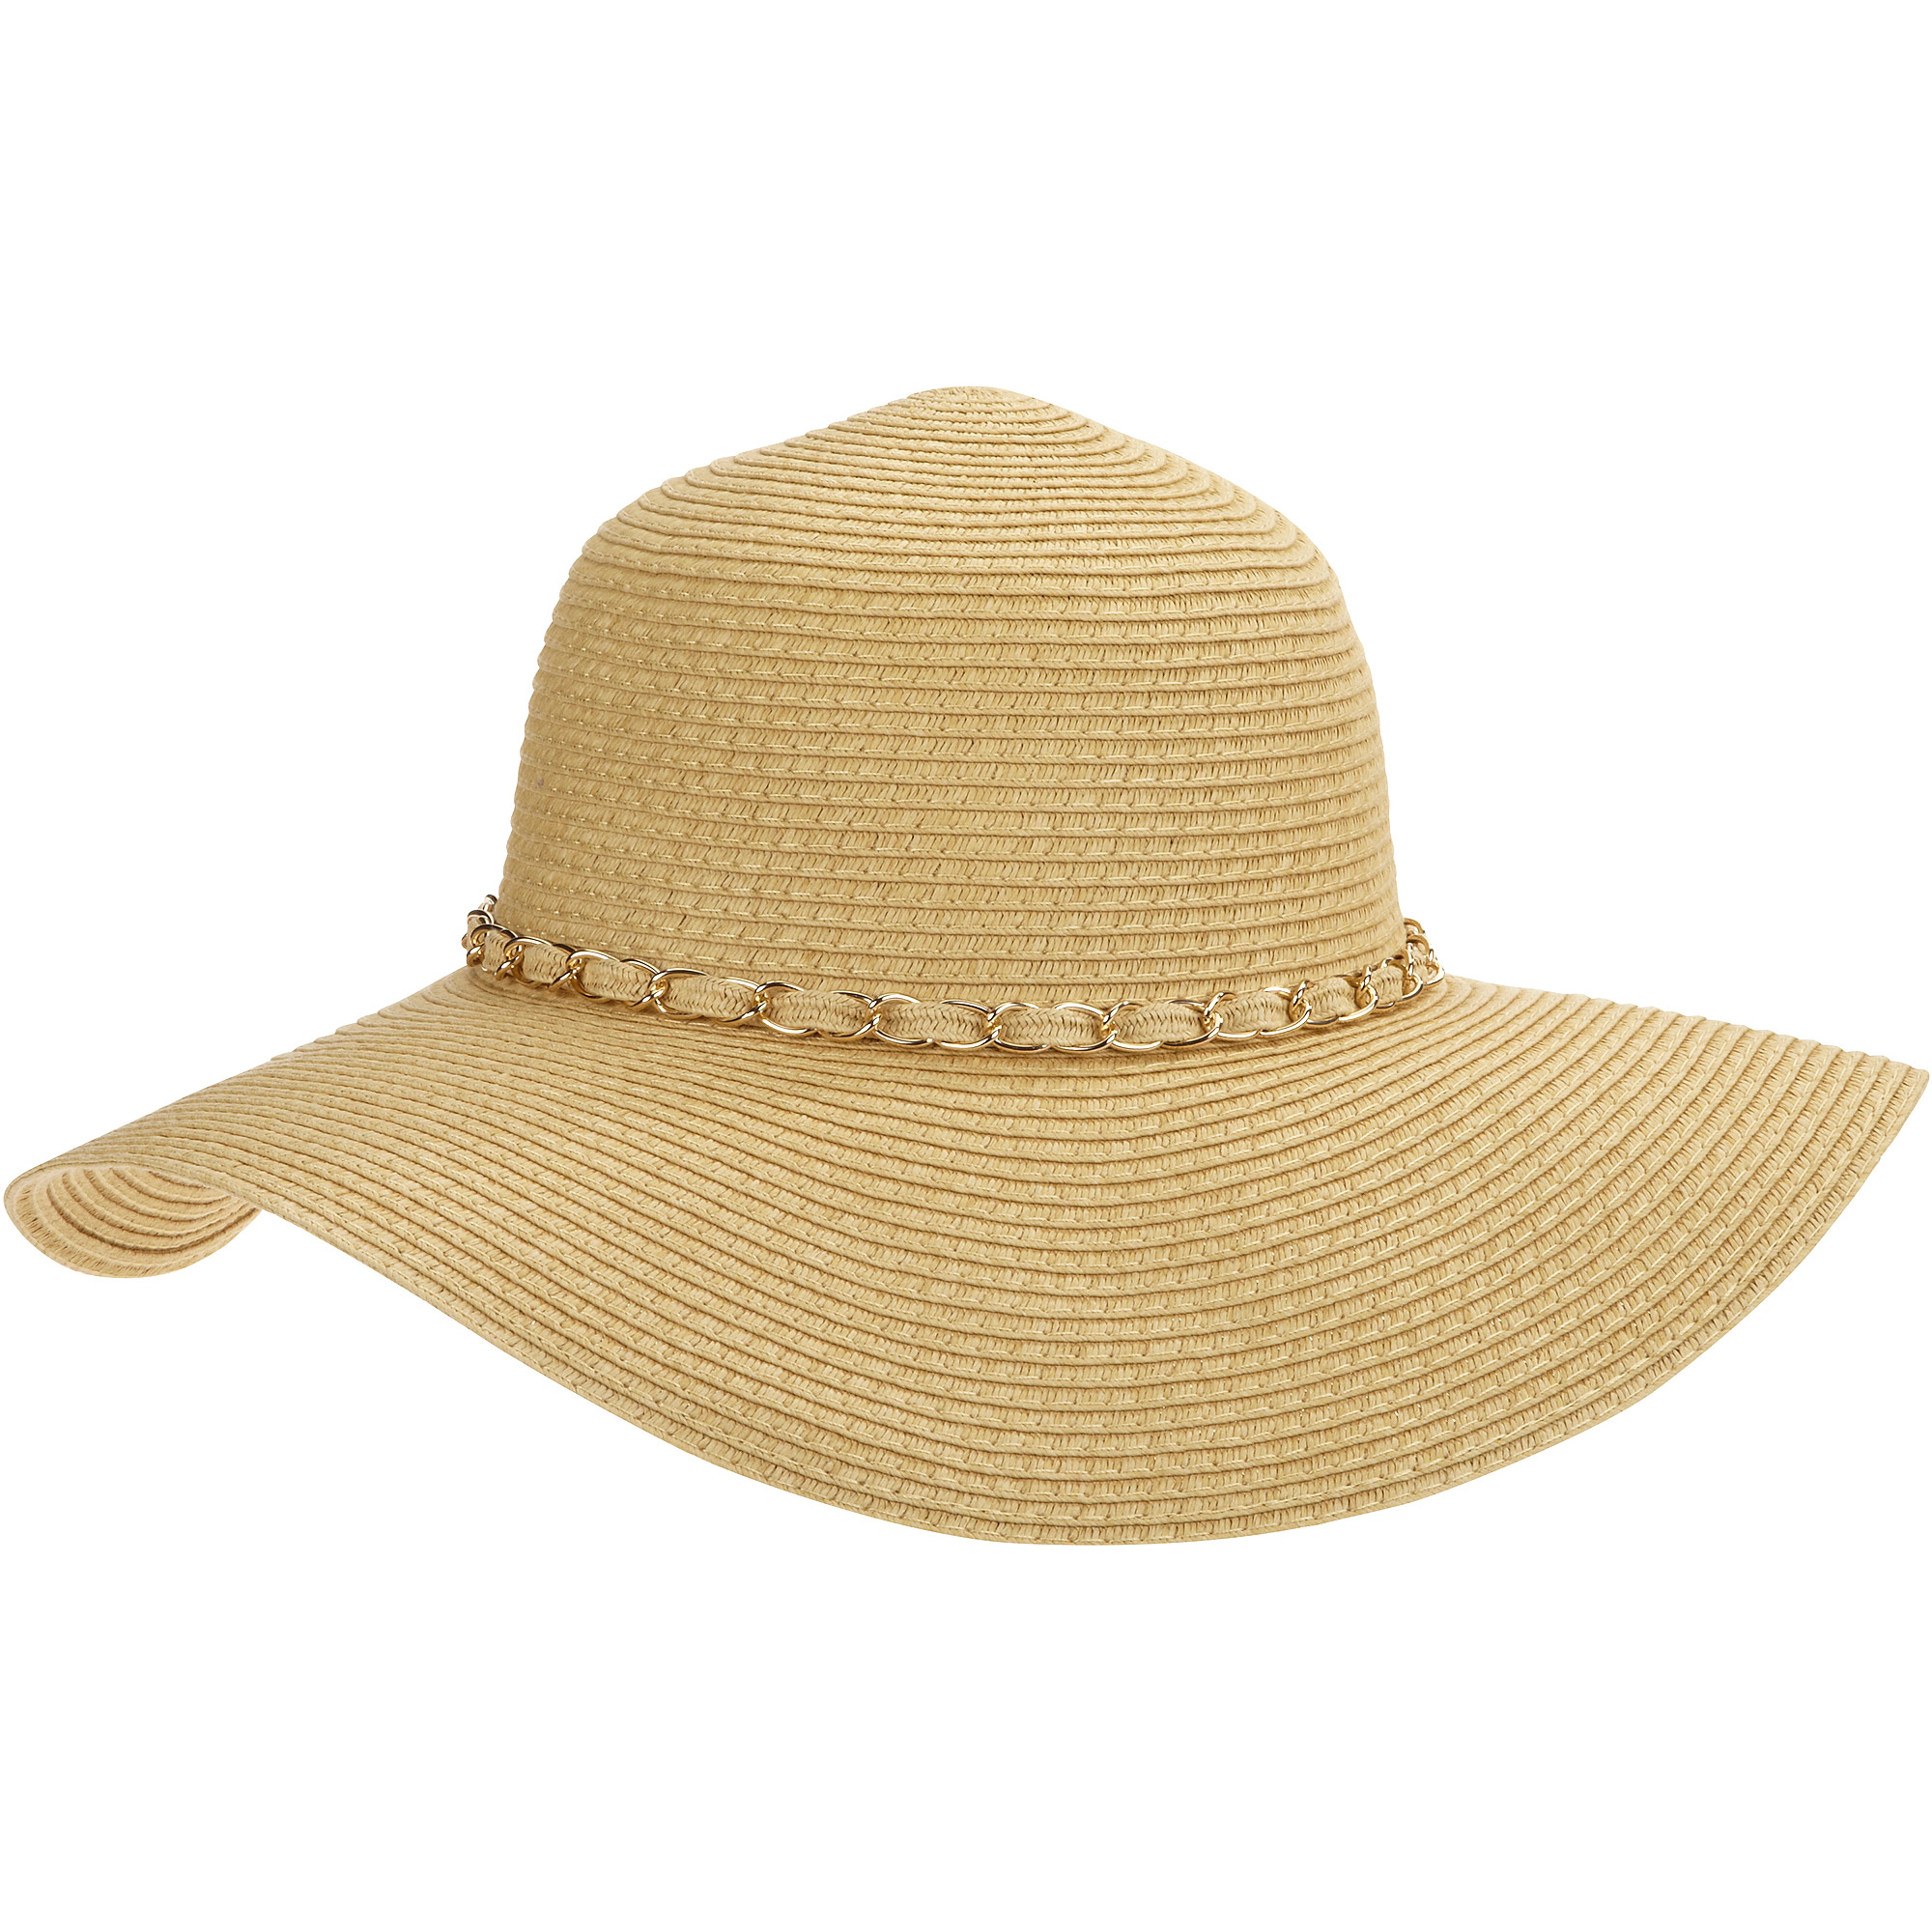 Floppy Chain Hat Tan - image 1 of 1